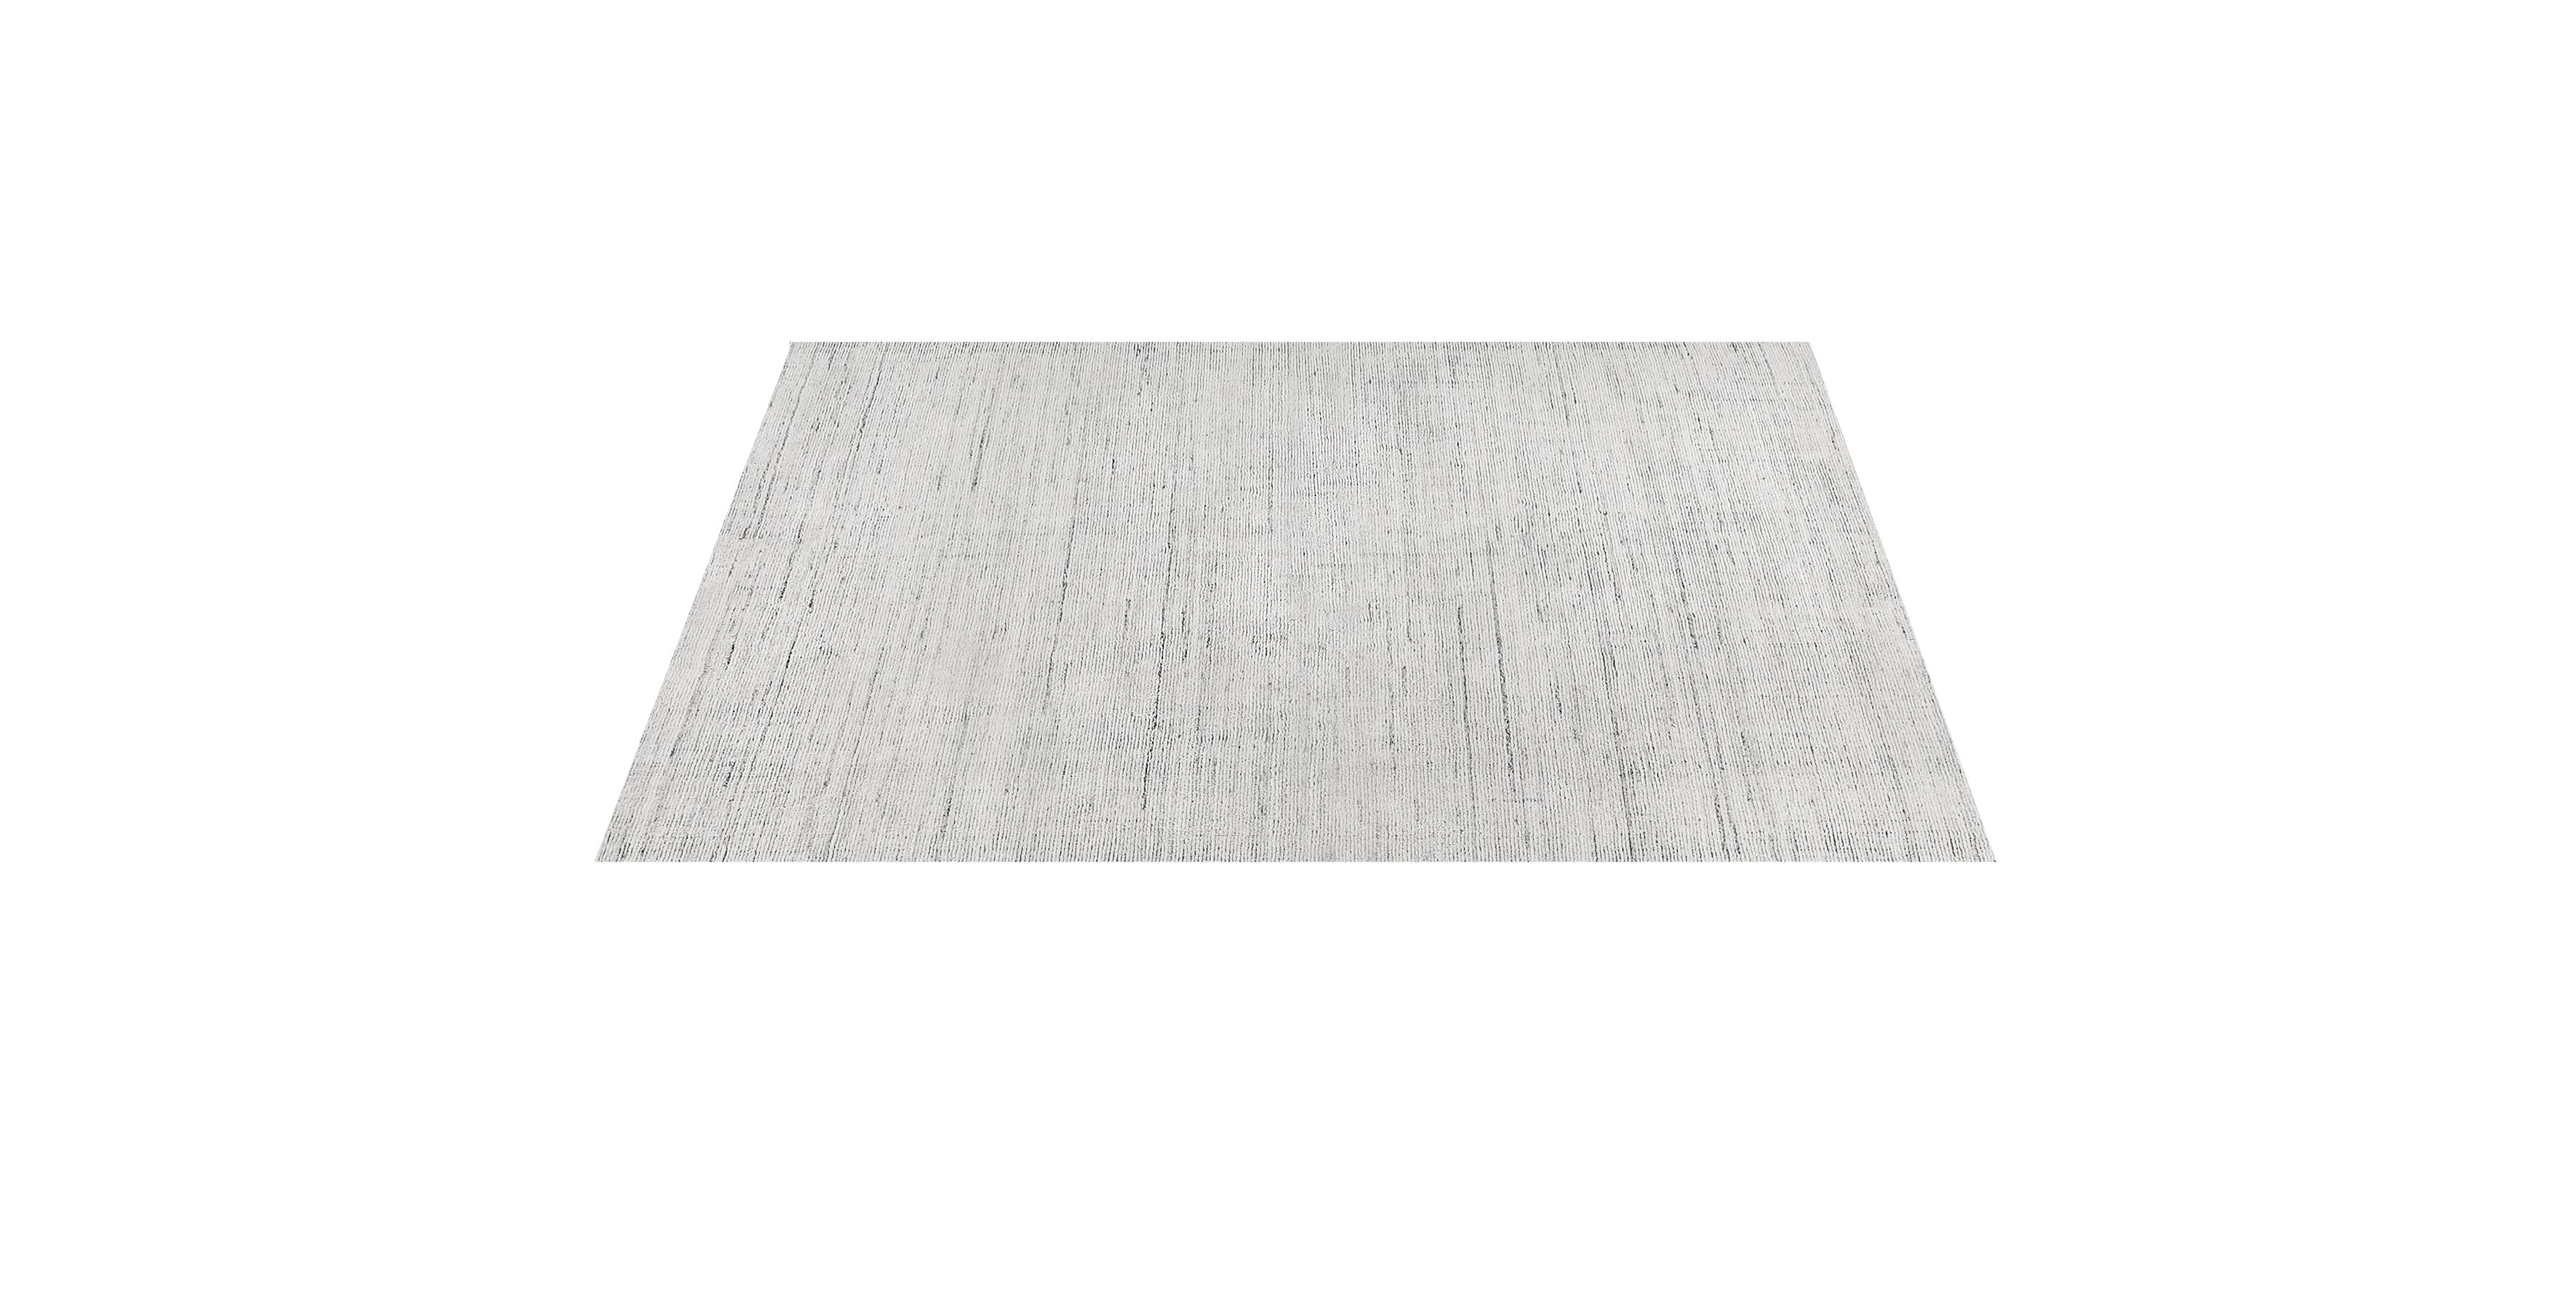 For Sale: Beige (Performance Distressed Natural) Ben Soleimani Performance Distressed Rug 12'x15' 3